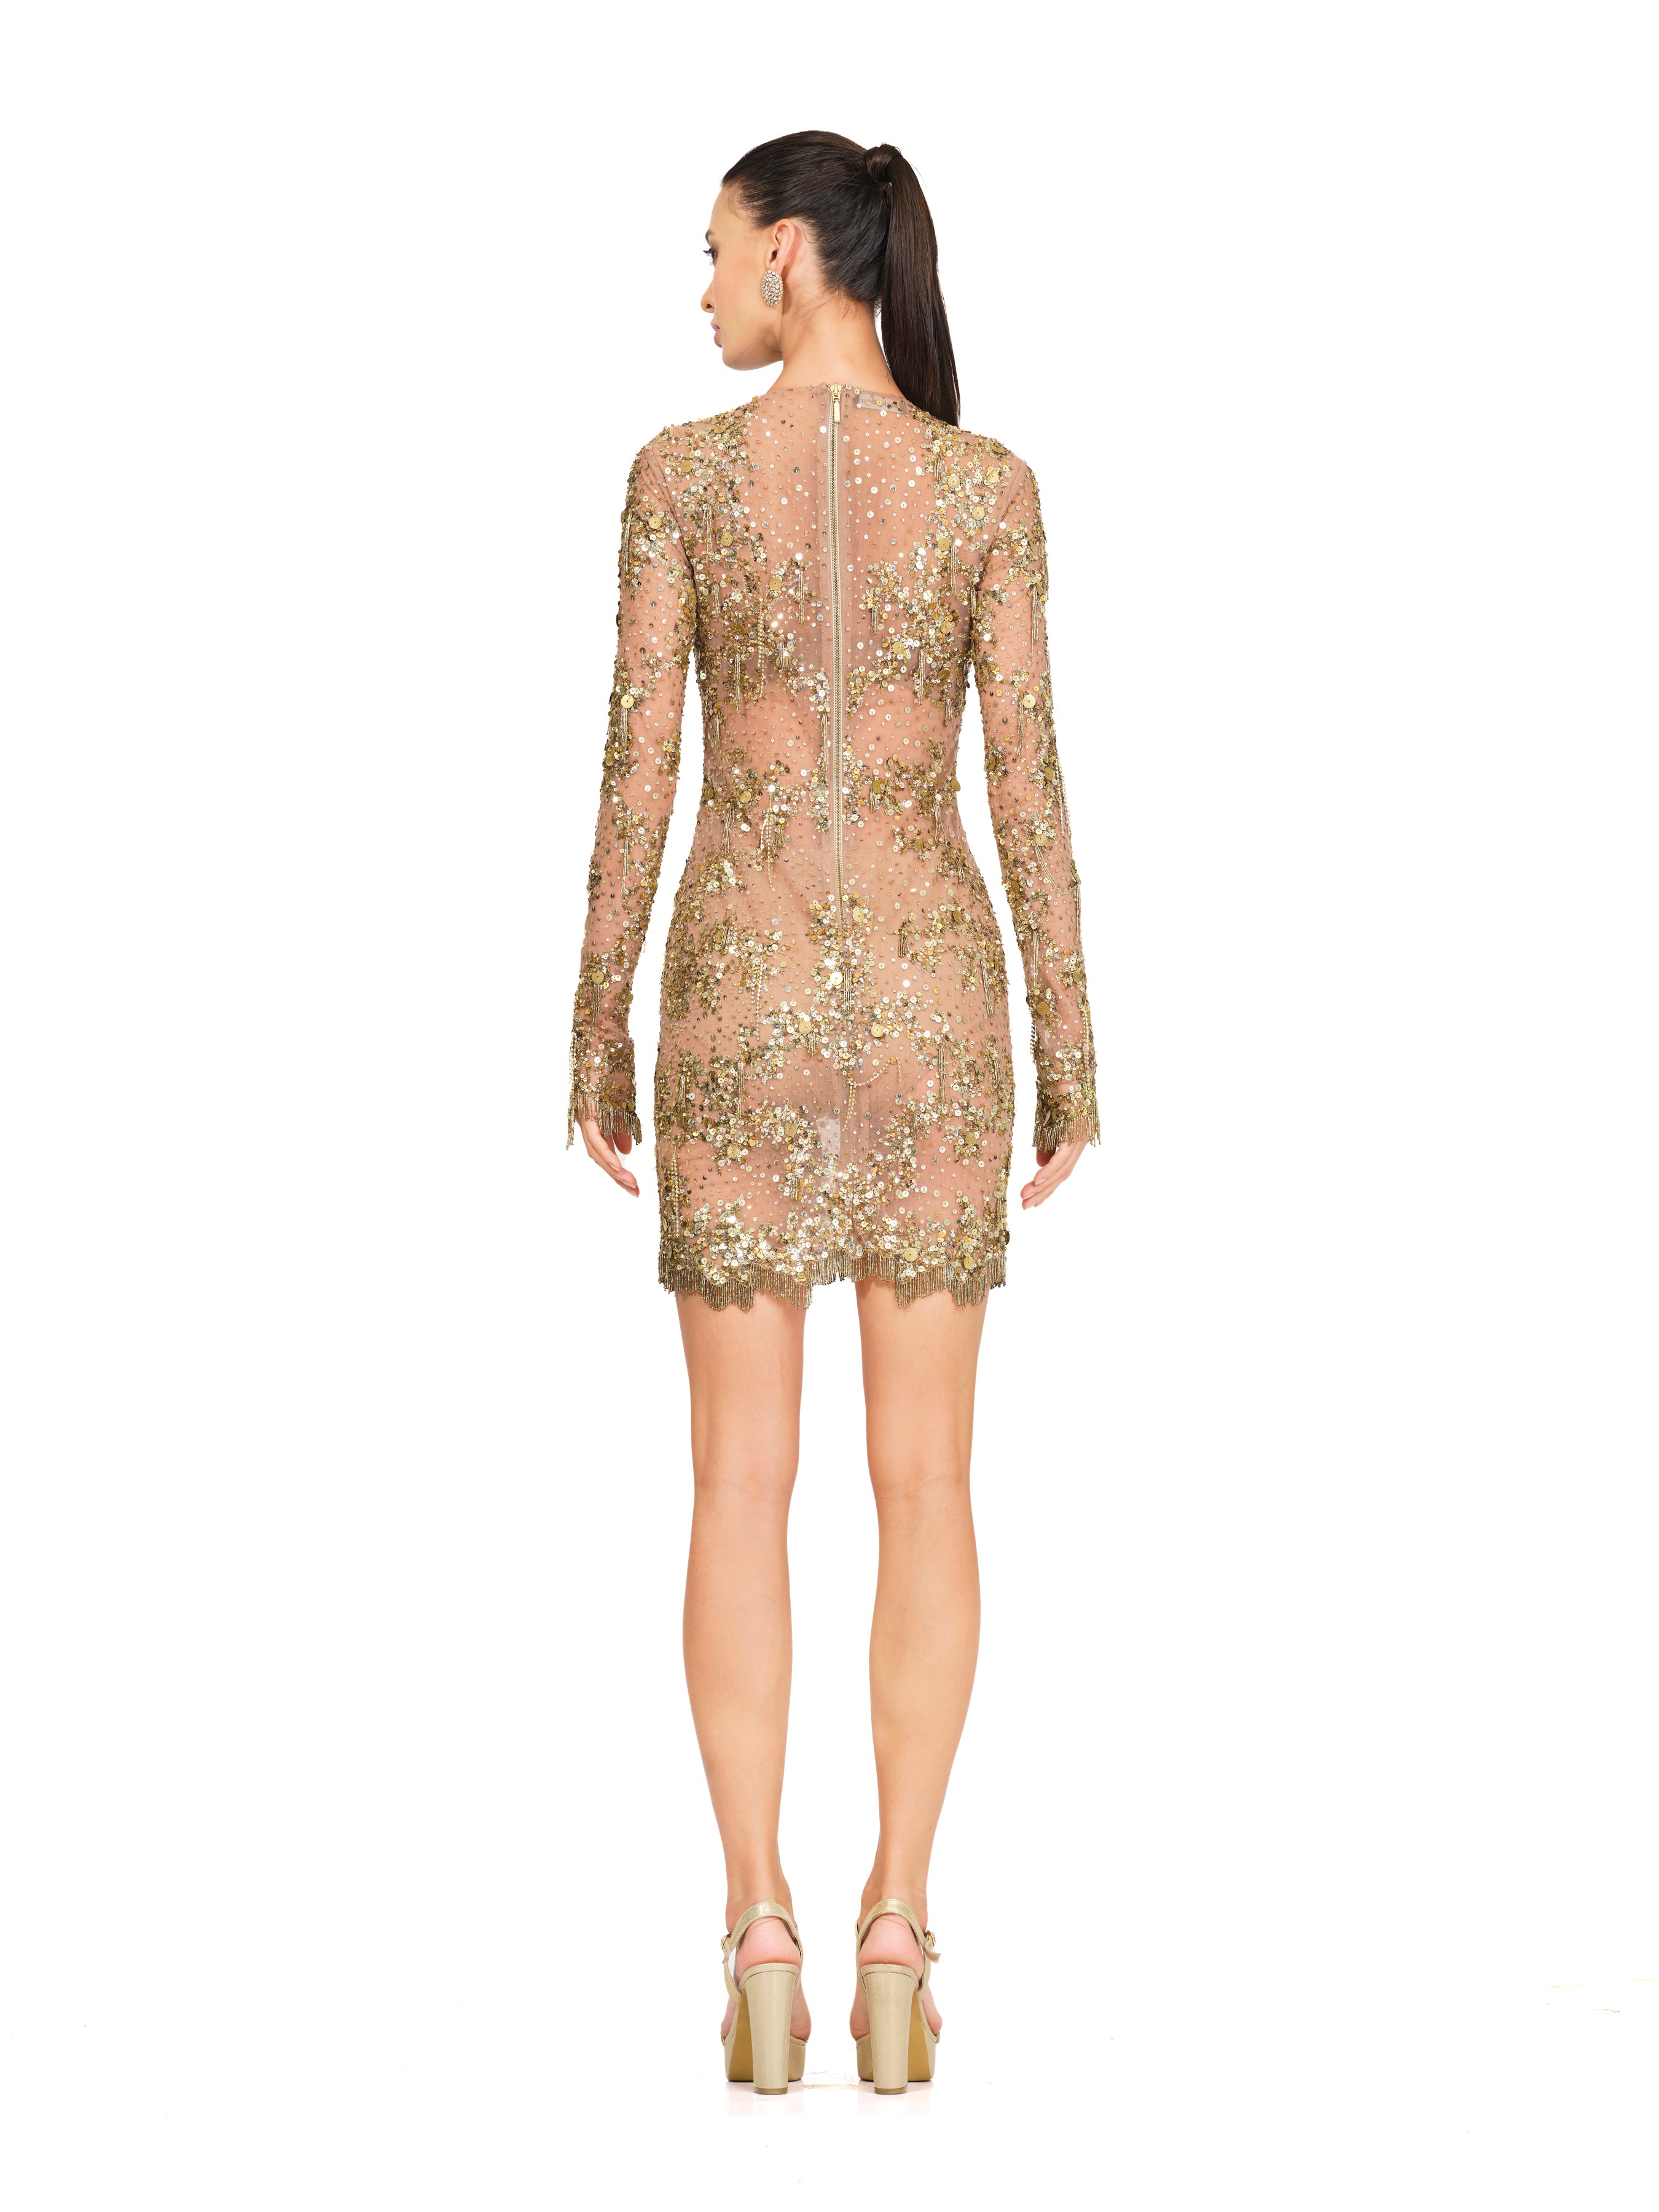 Gold Sheer Dress With Embroidery